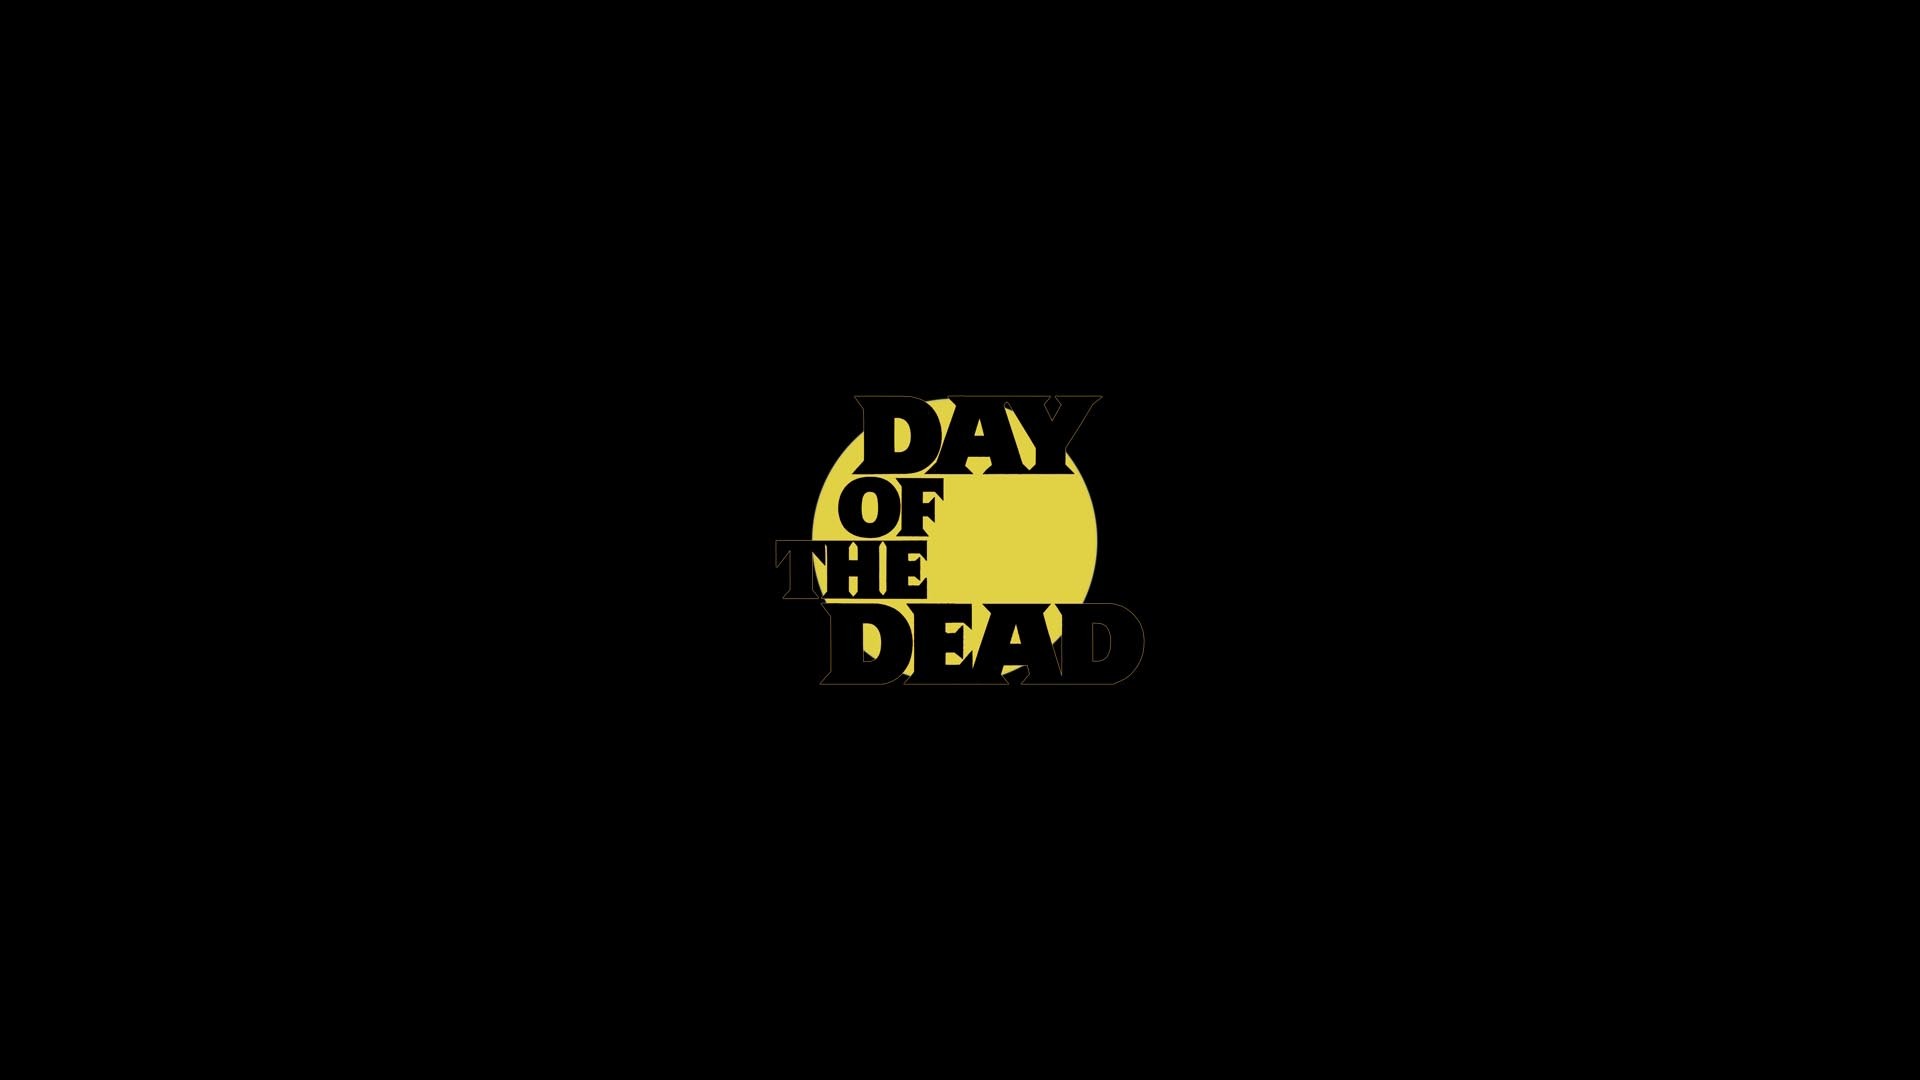 Day Of The Dead Widescreen Wallpaper